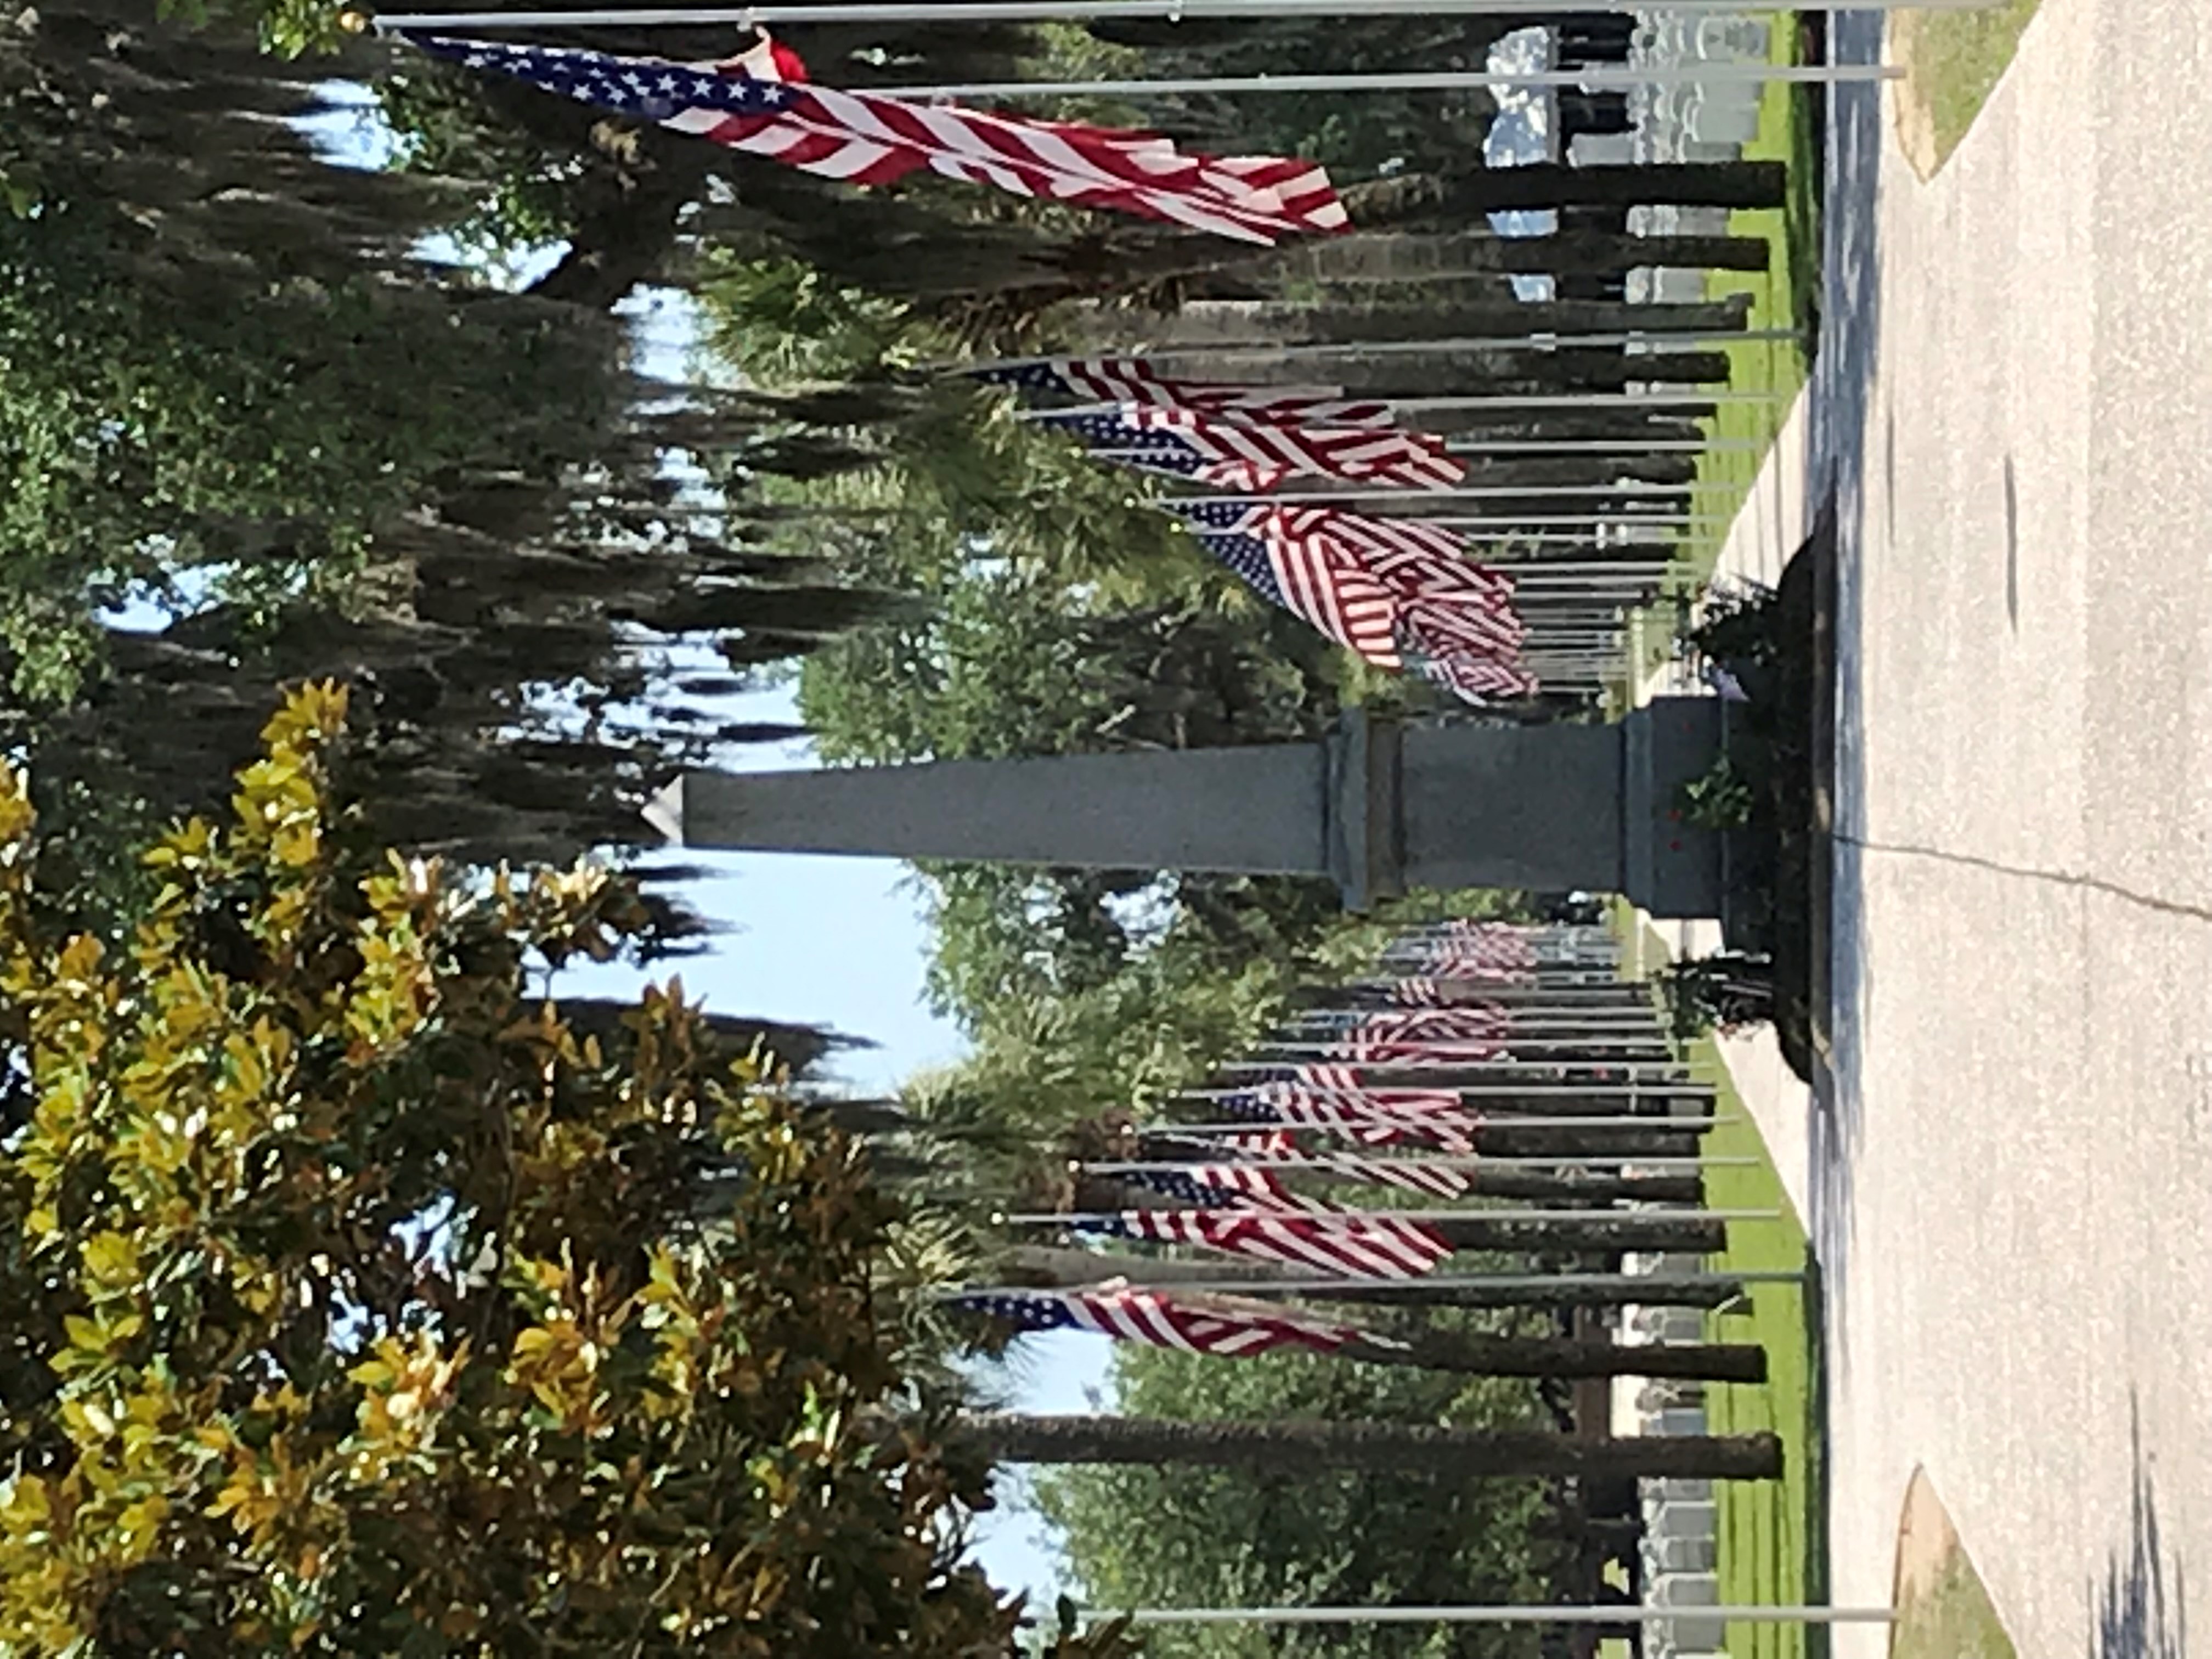 BNC Avenue of Flags